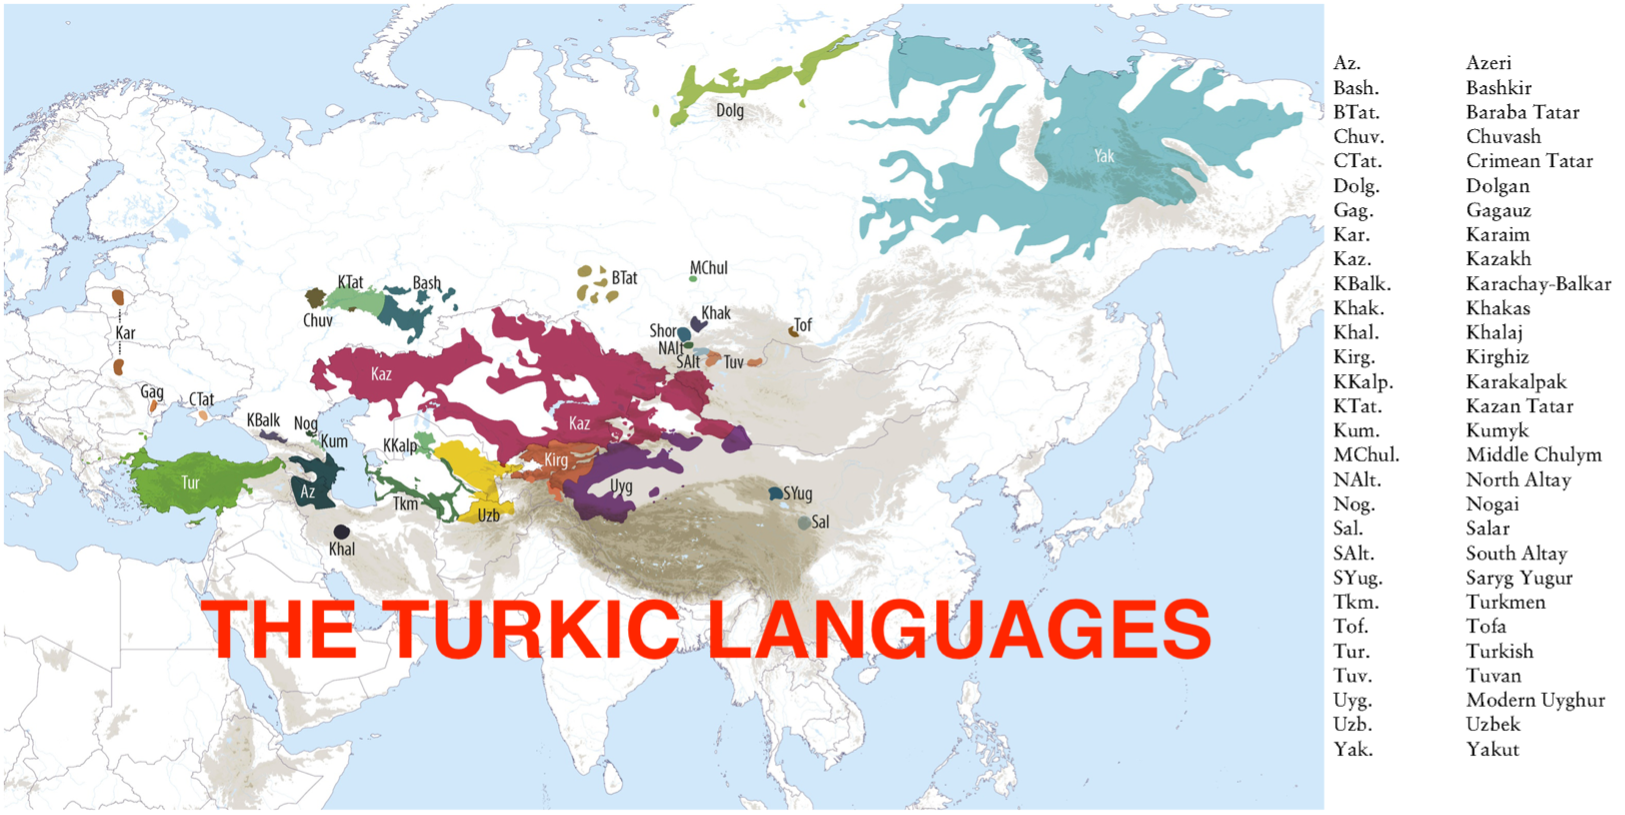 The Turkic Languages What Are Their Similarities And Differences